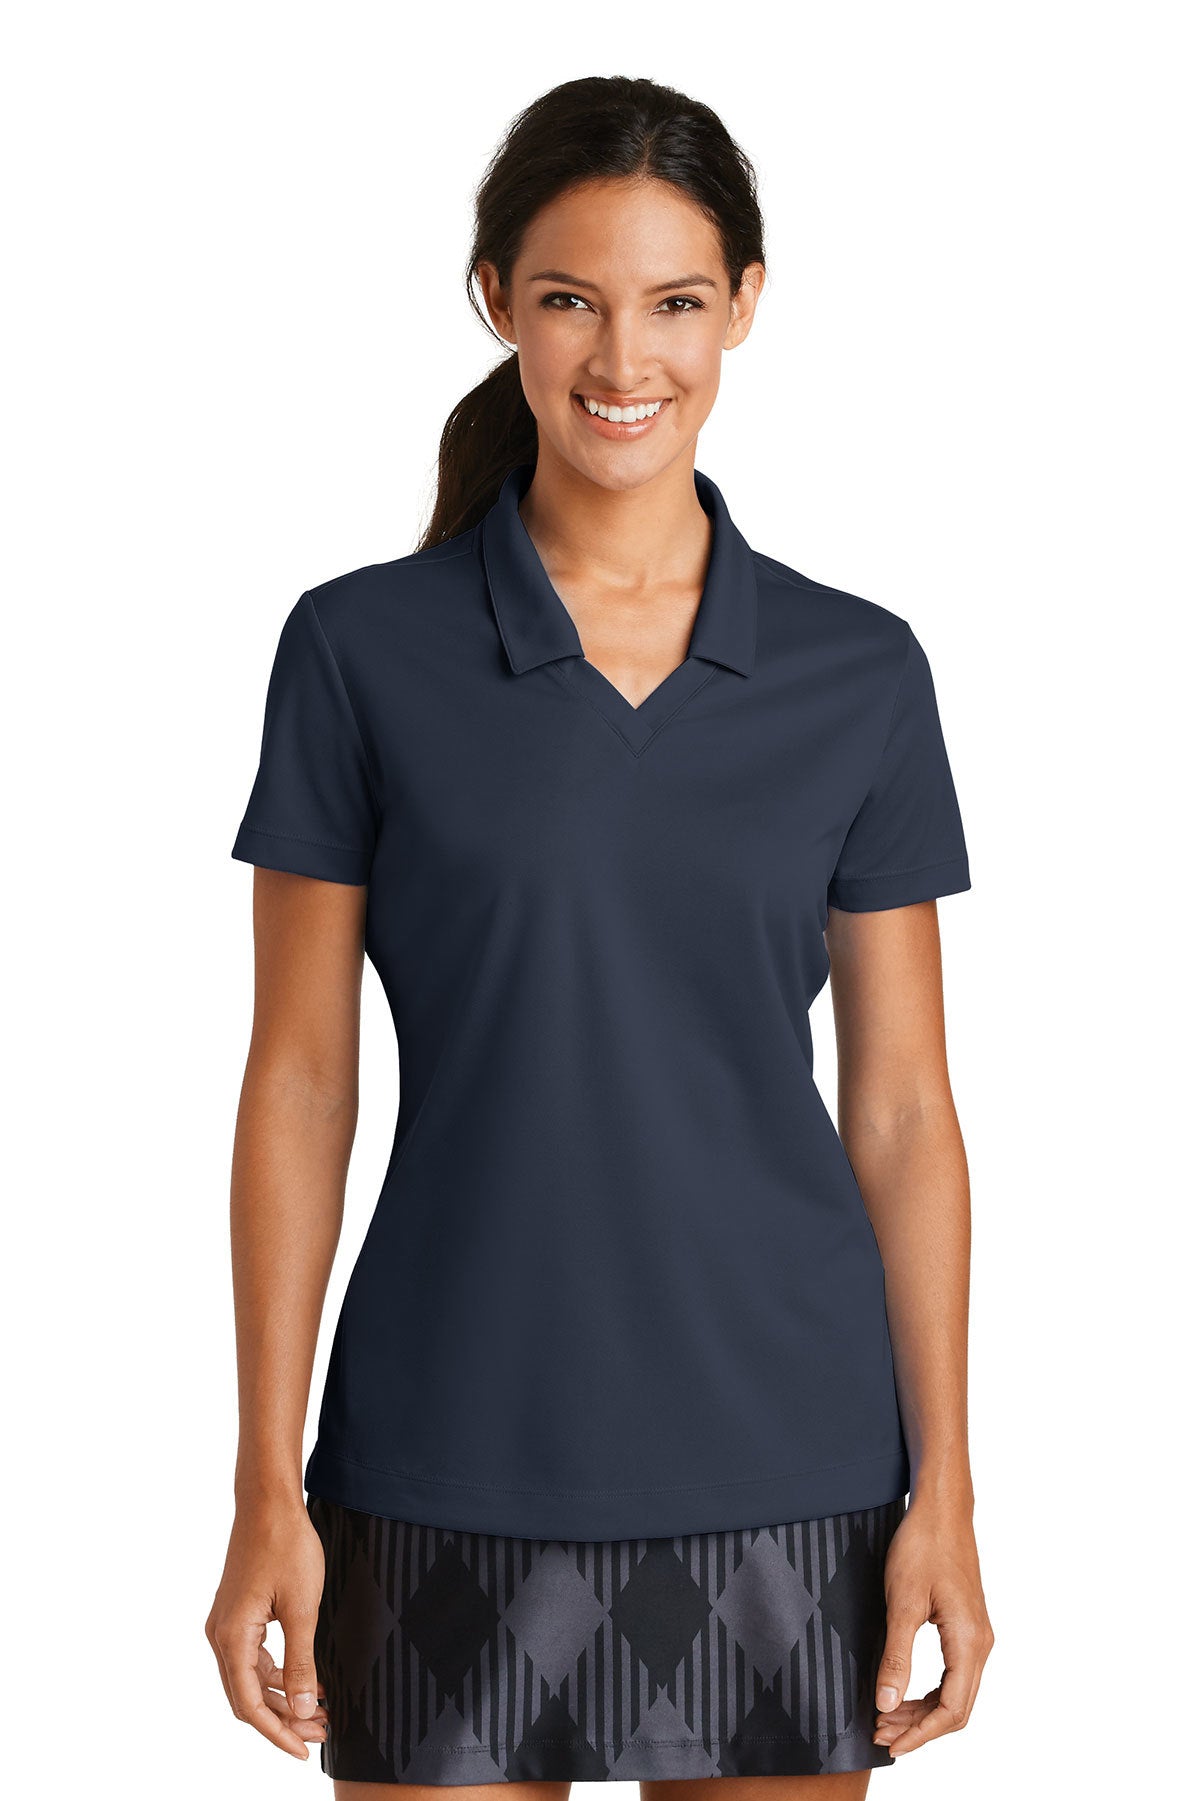 LL Loon Bird (Embroidered) Nike Women's Golf Polo